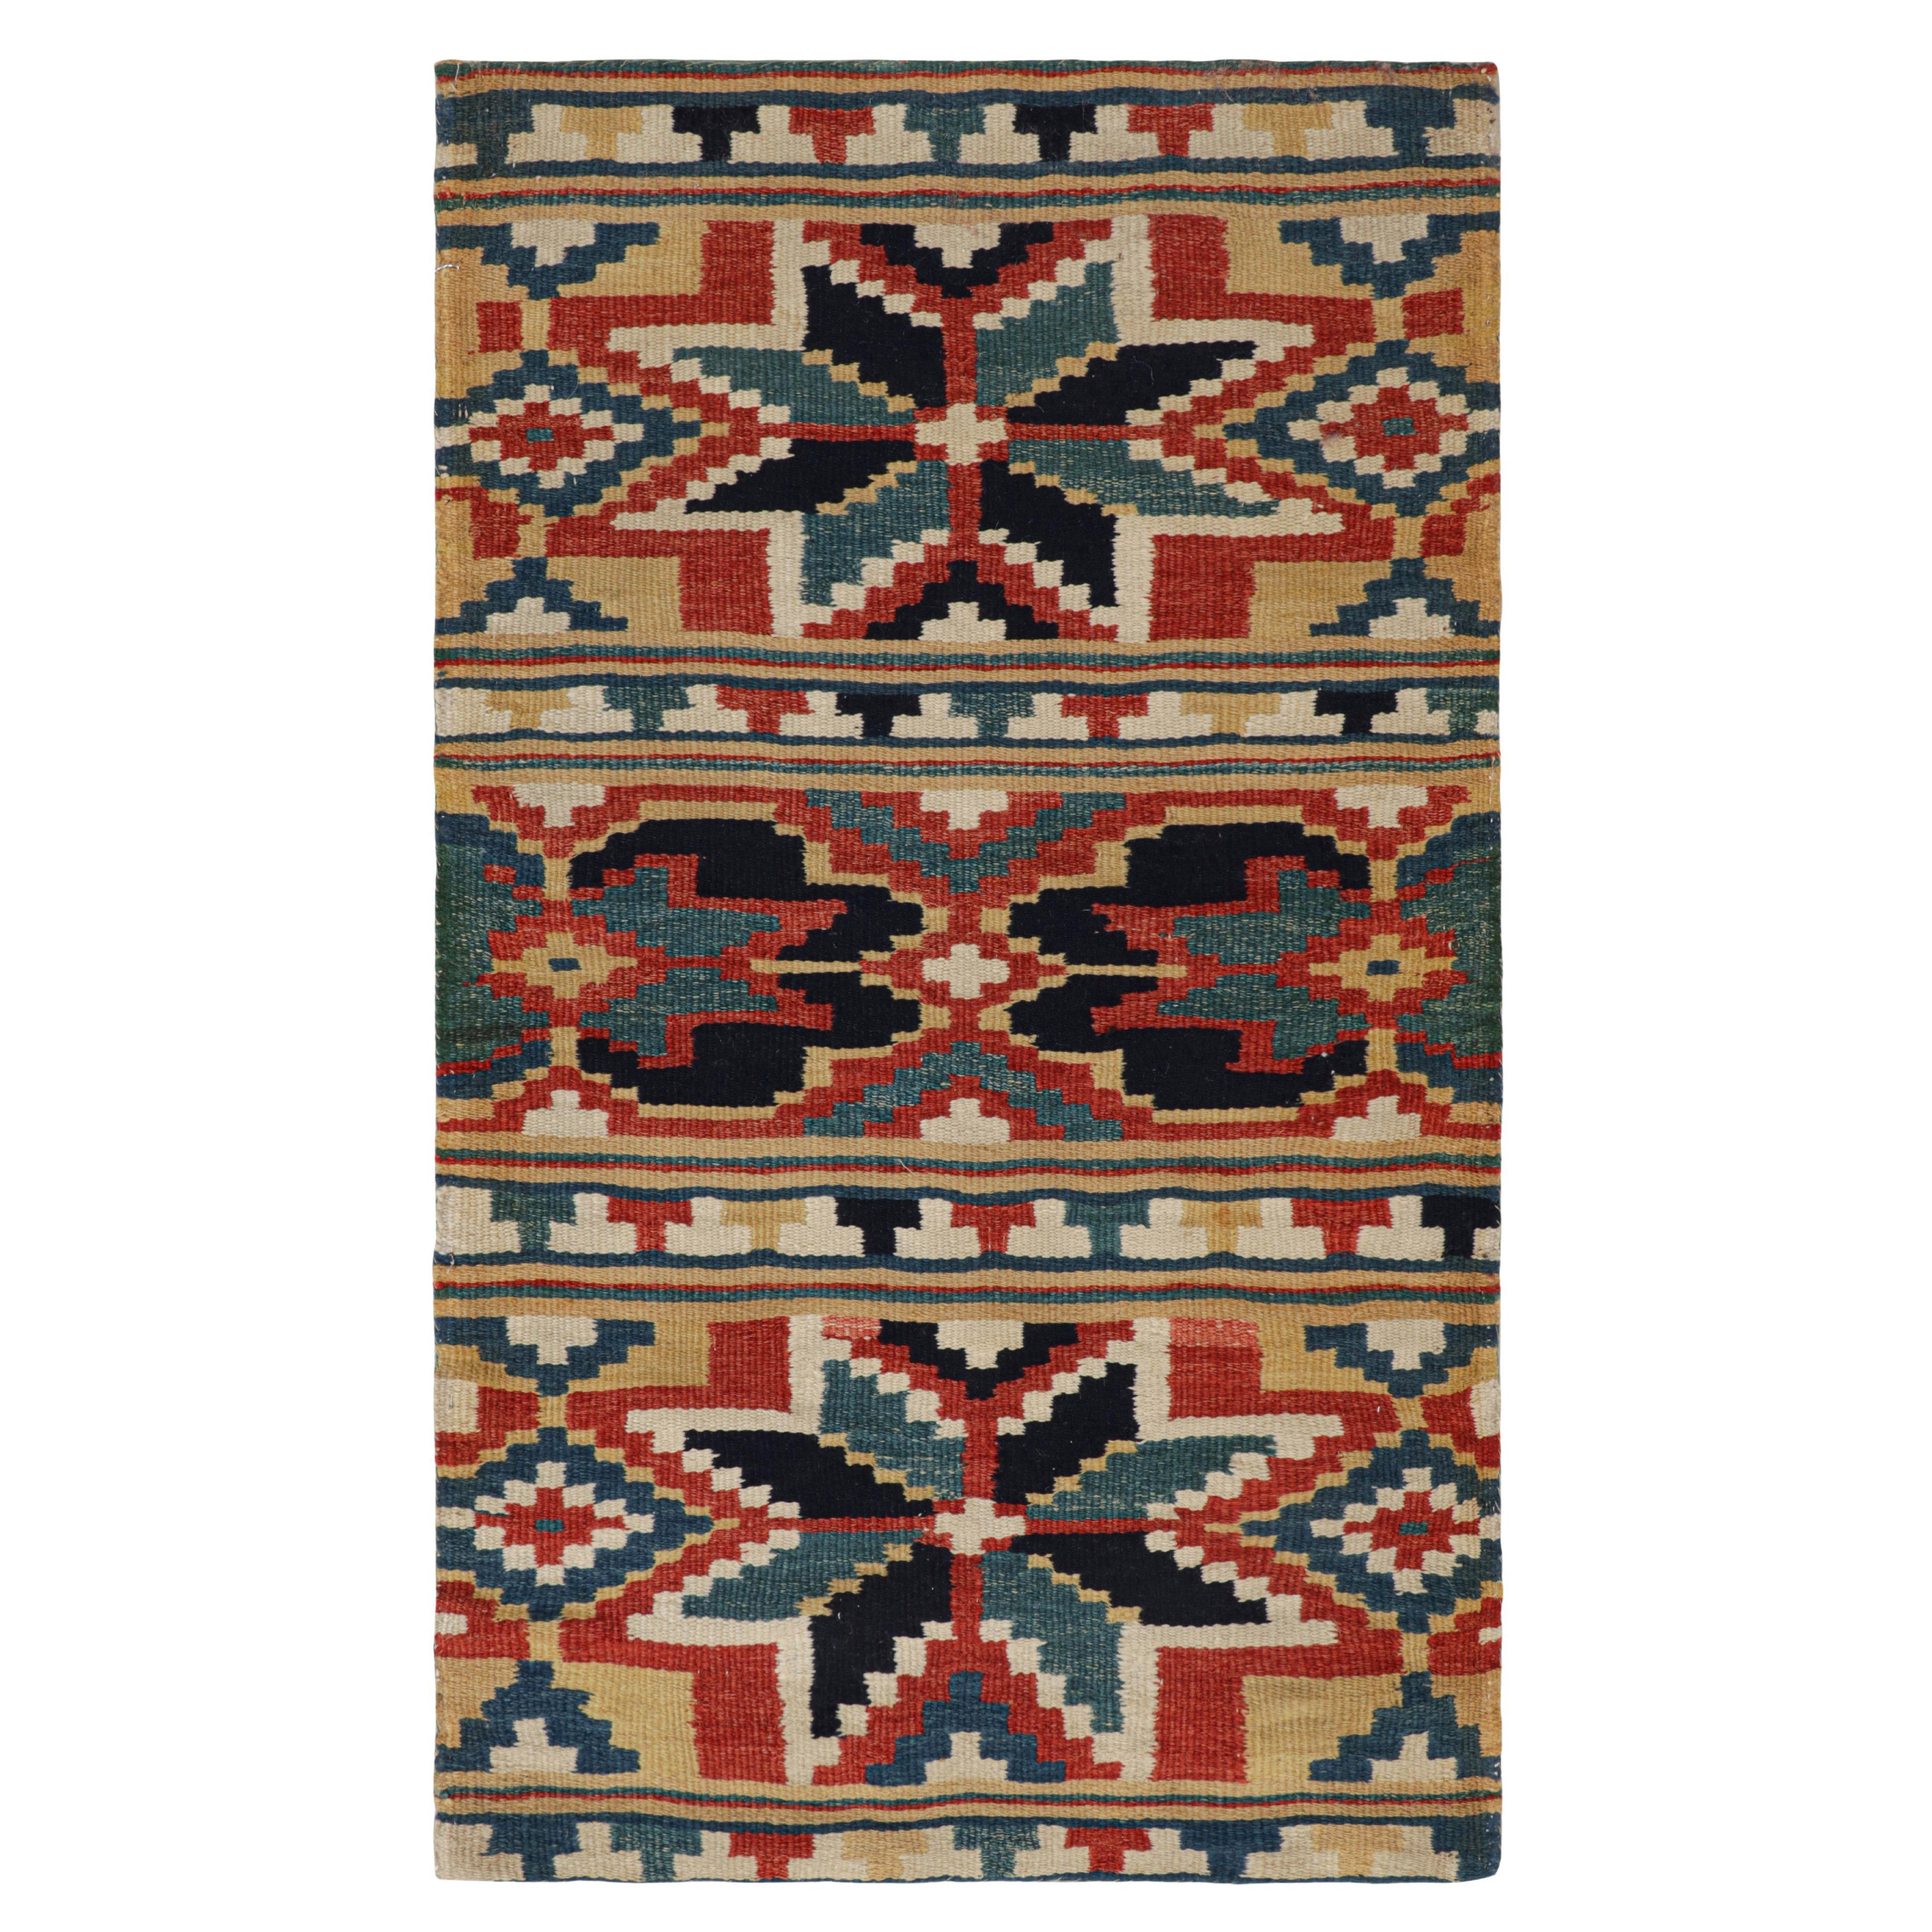 Antique Swedish Rollakan Tapestry with Geometric Patterns, from Rug & Kilim